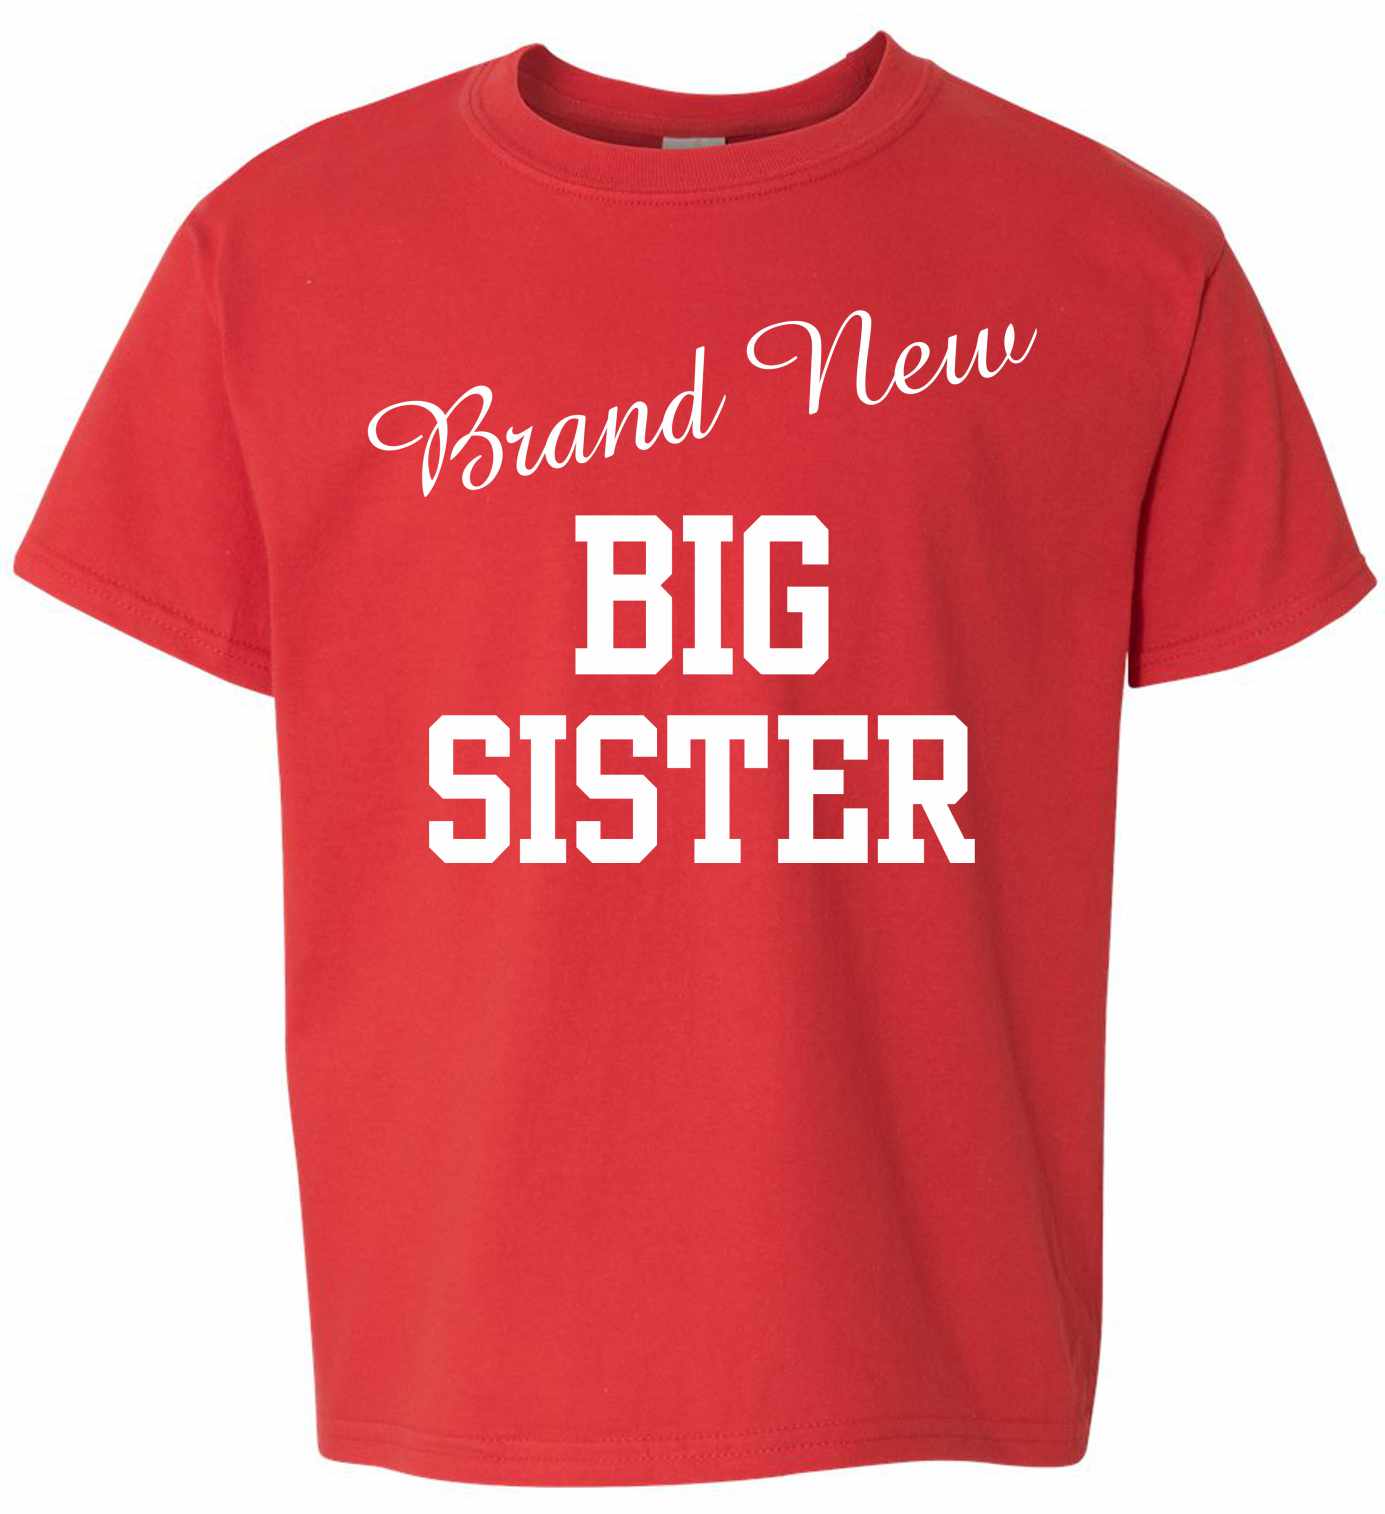 Brand New Big Sister on Youth T-Shirt (#1000-201)